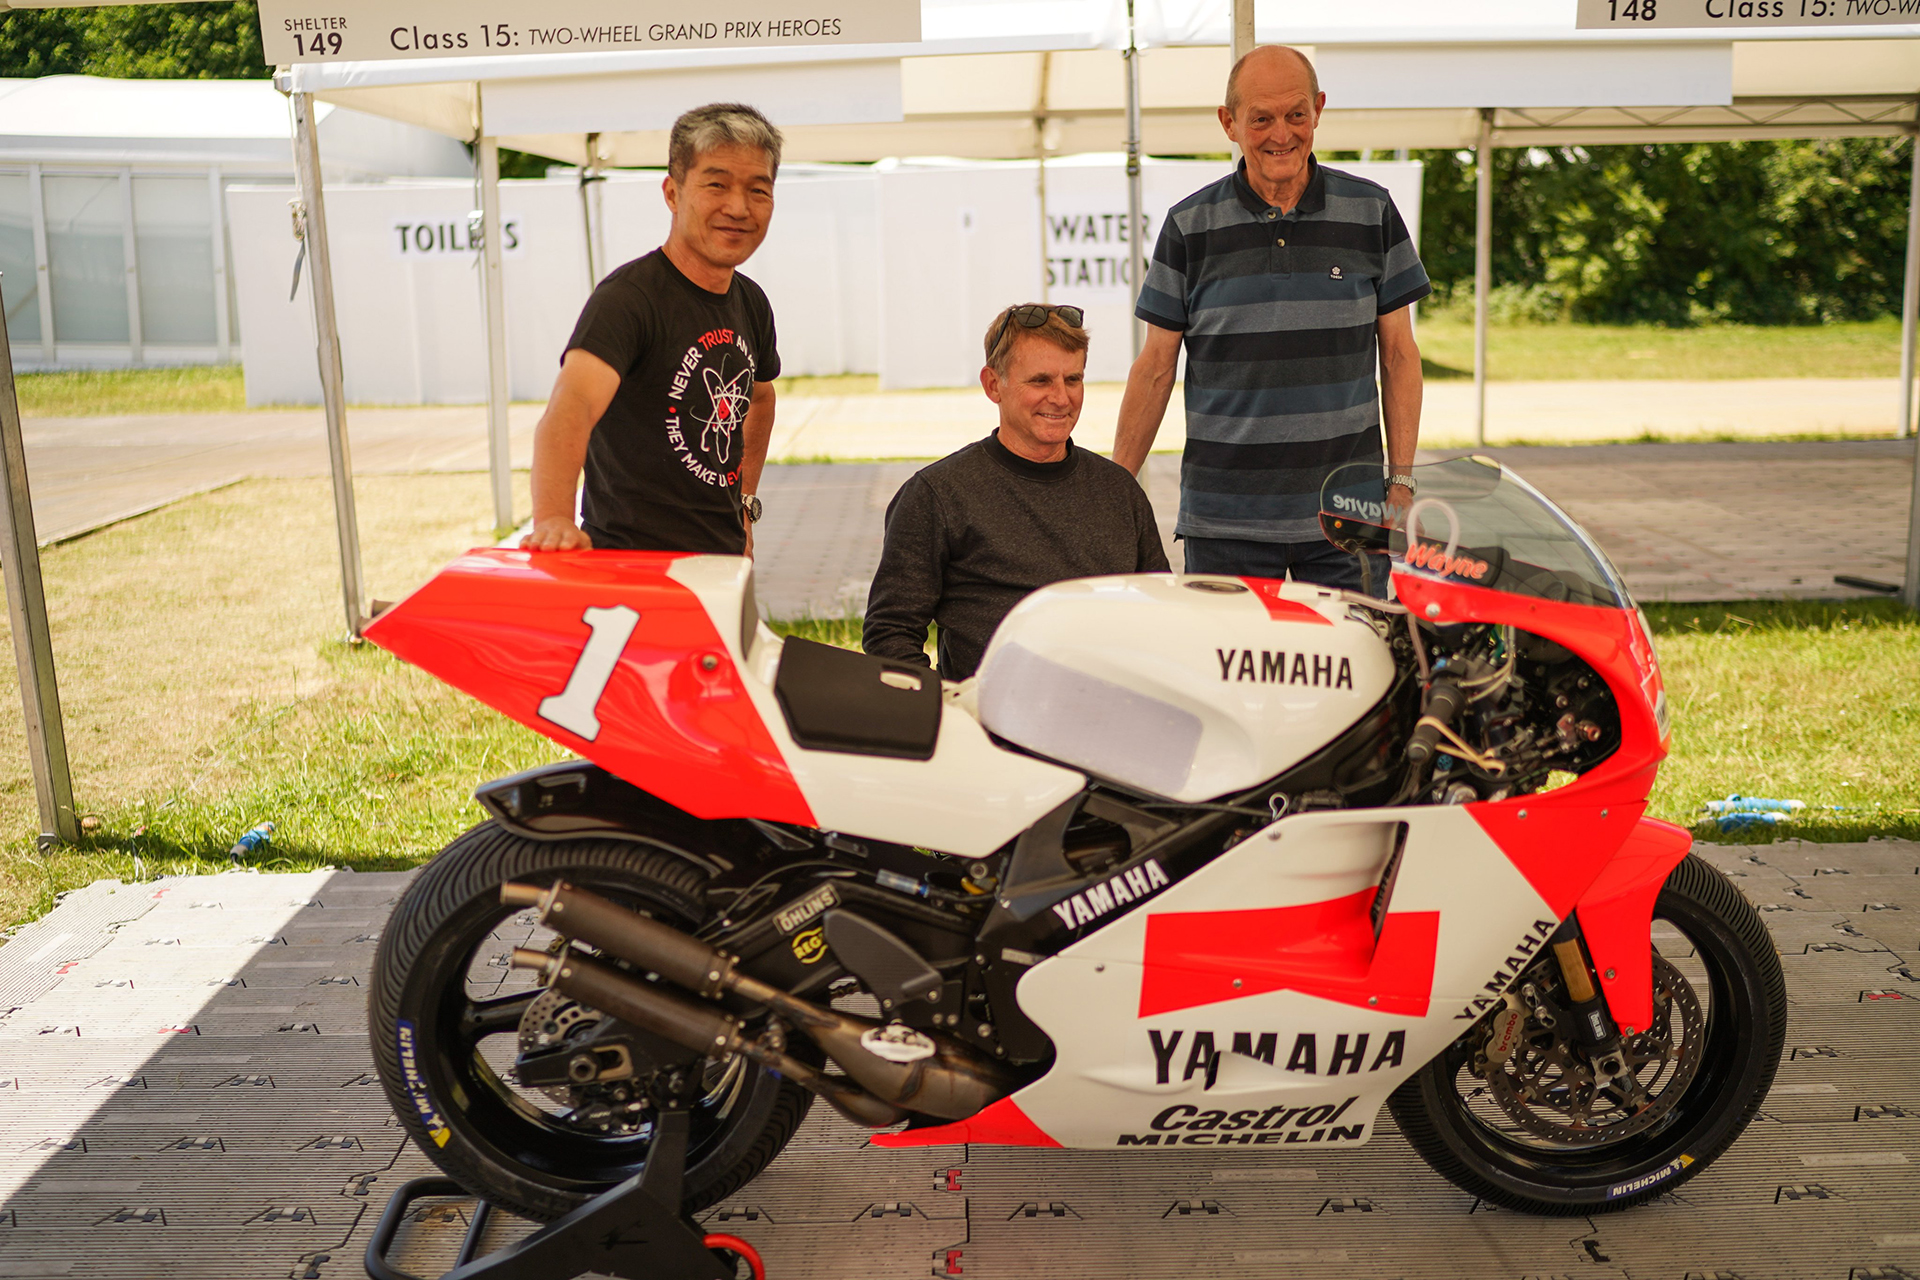 Wayne Rayne and his Yamaha with which he was MotoGP champion in 1992 (@fosgoodwood)